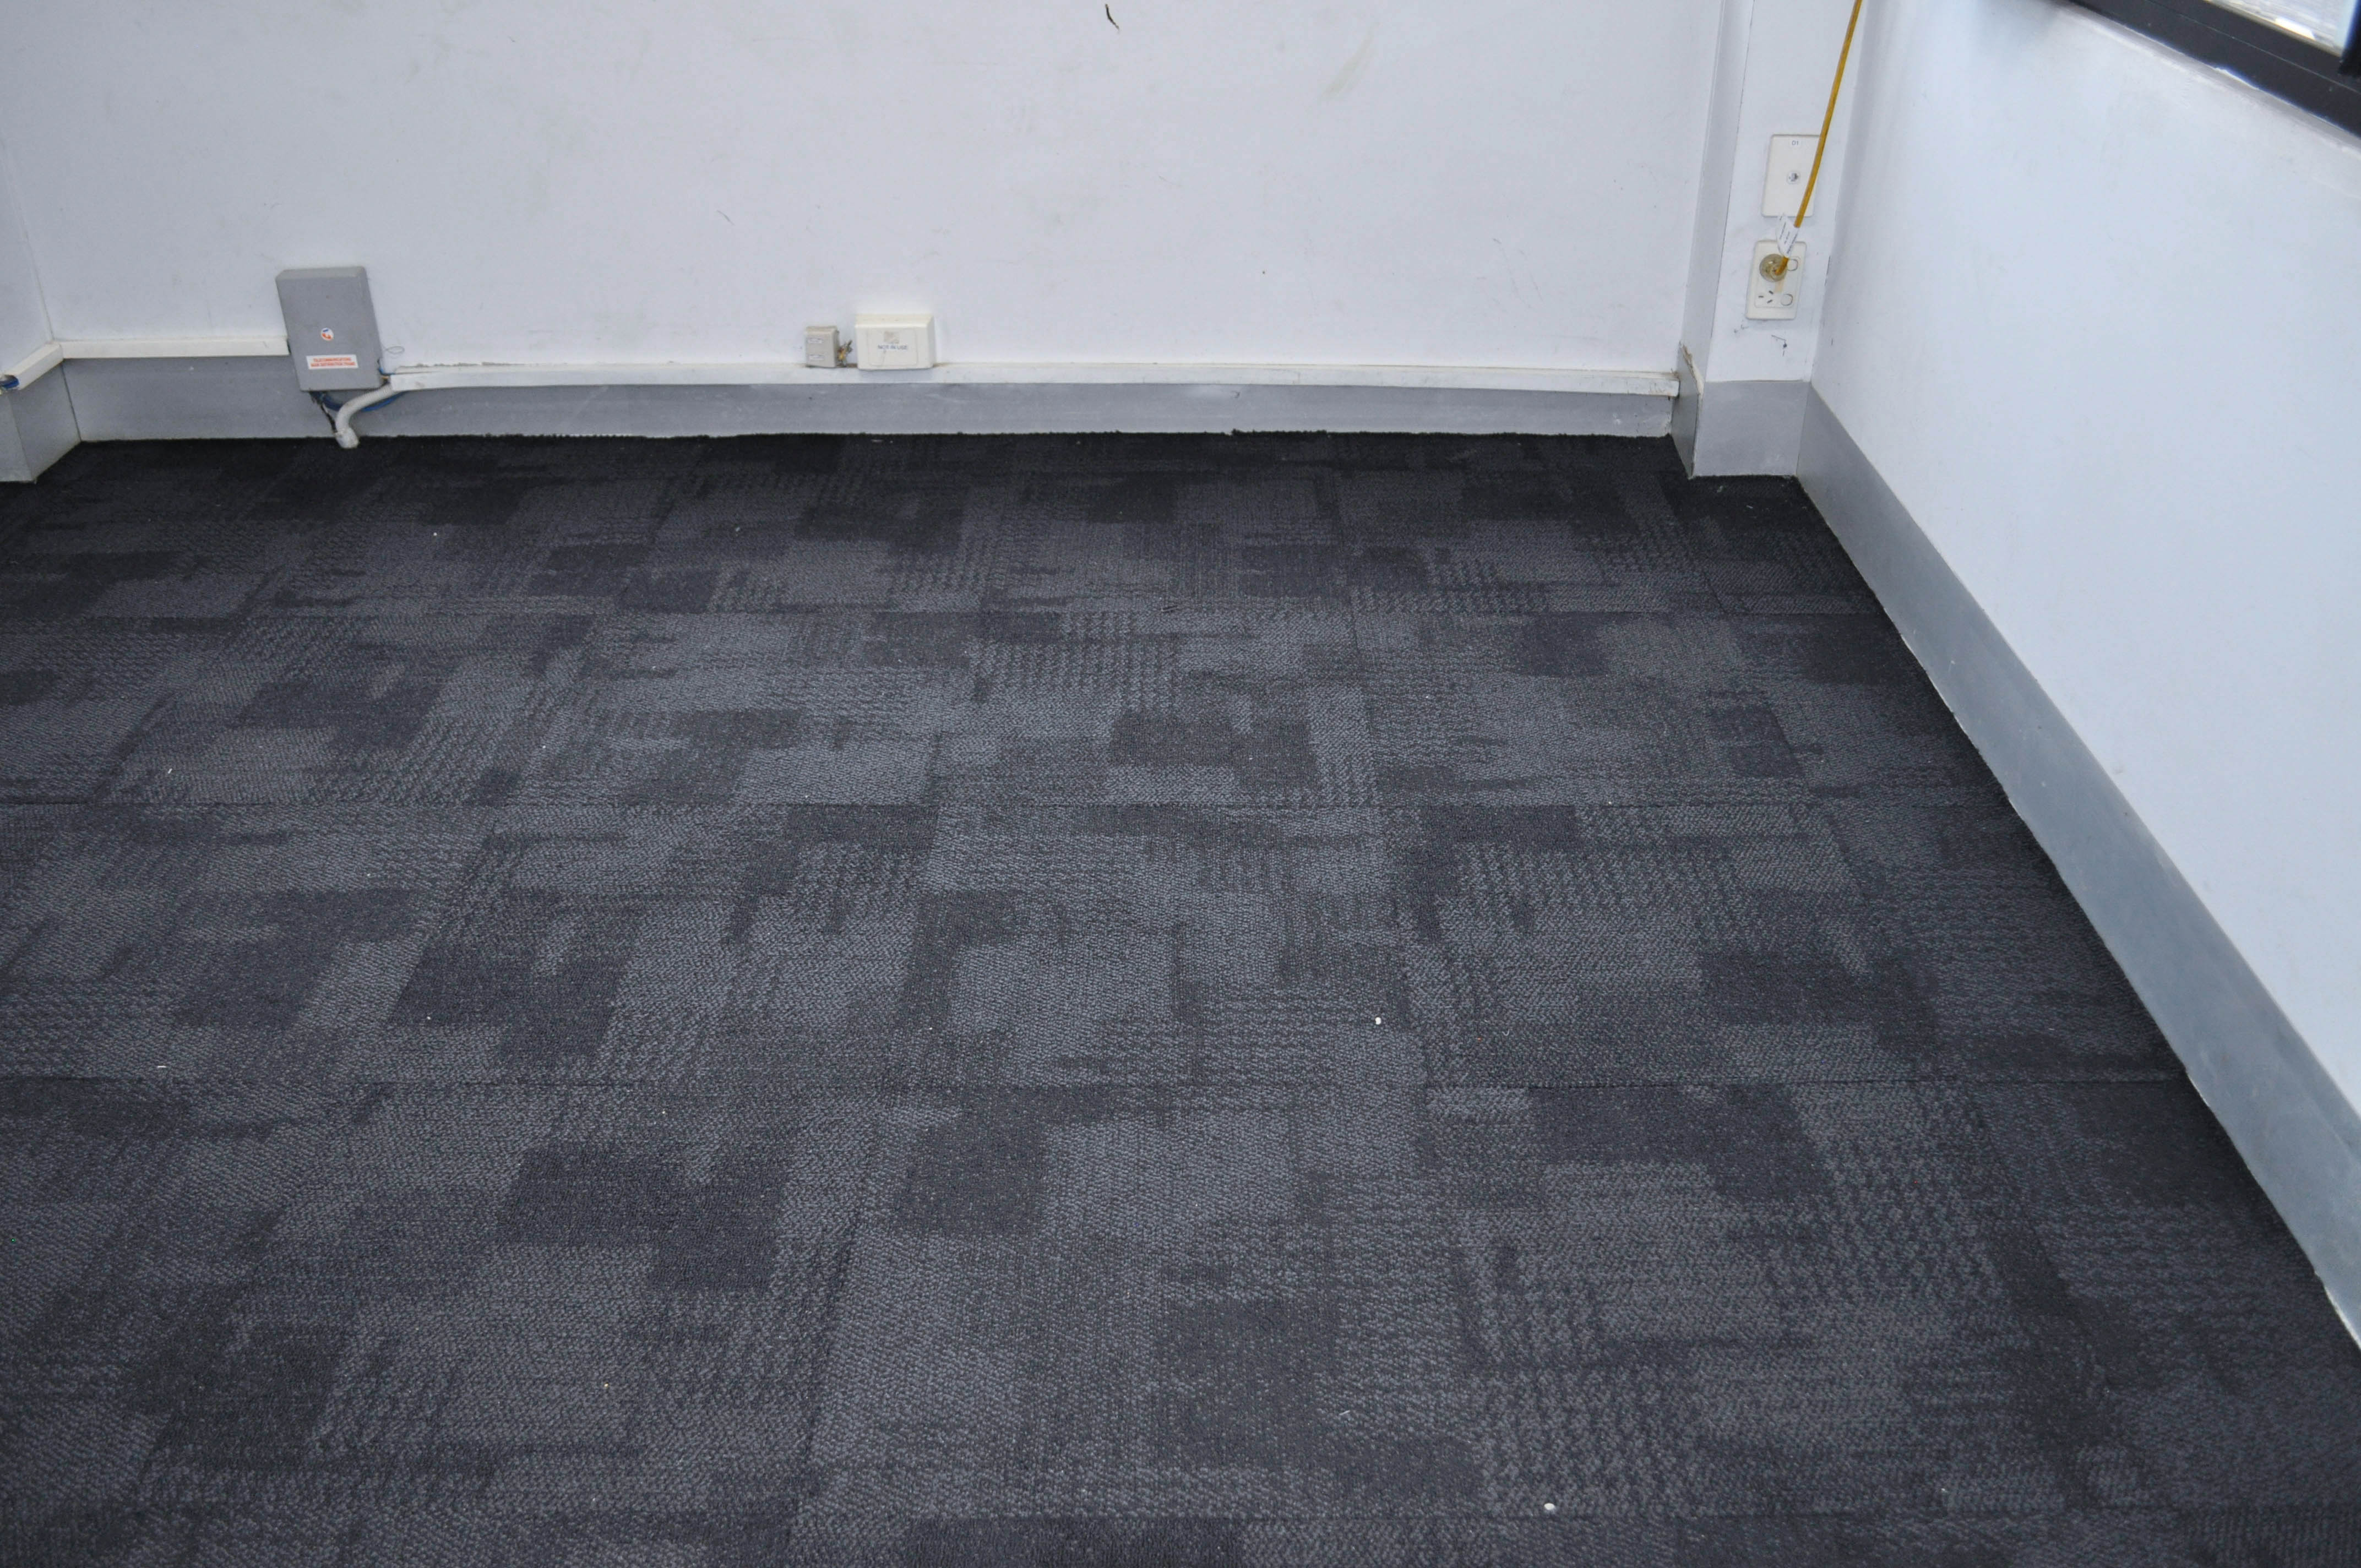 Concord Floors sold and installed these charcoal colored, commercial carpet tiles in a rectangular, empty office in Laverton North.